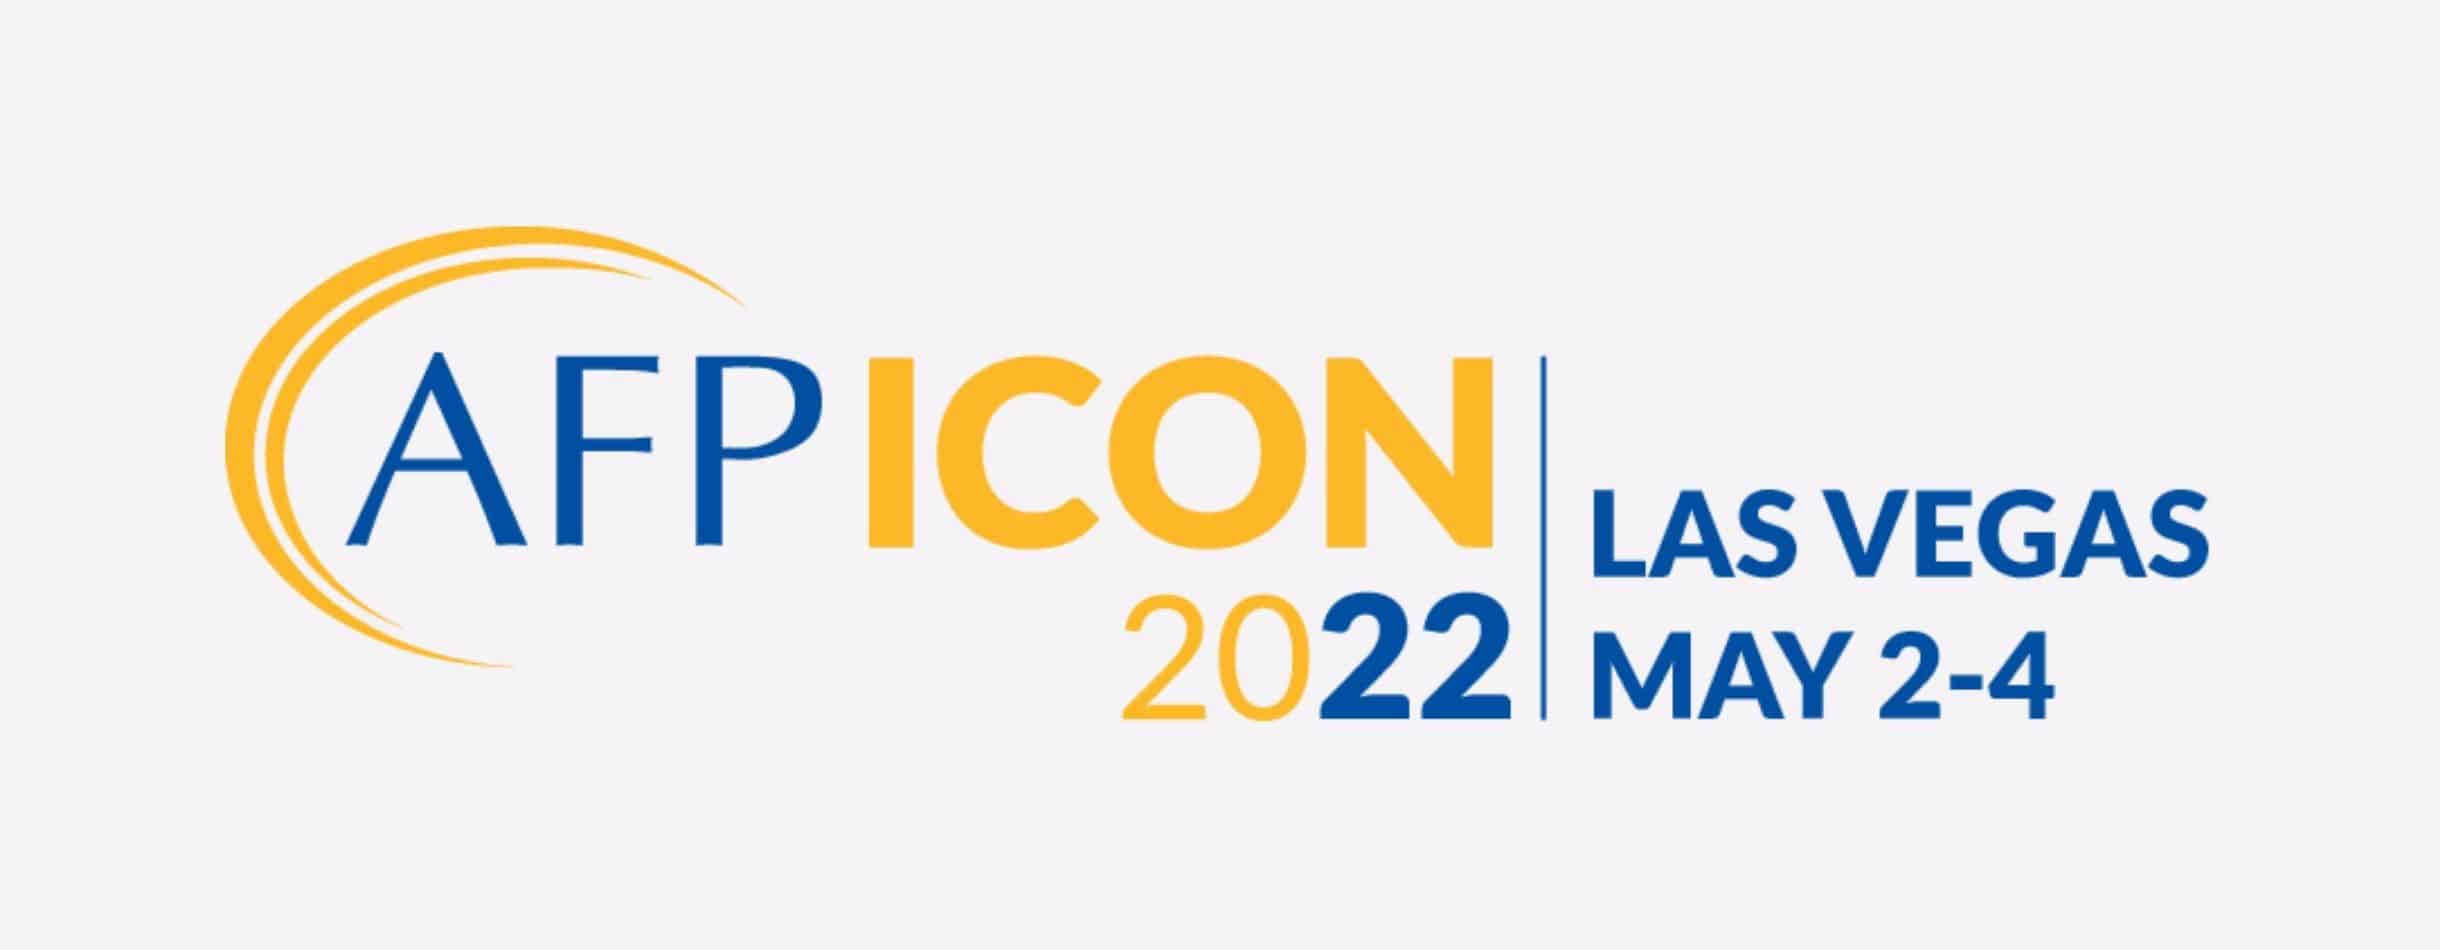 AFP Icon in Las Vegas from May 2nd to 4th